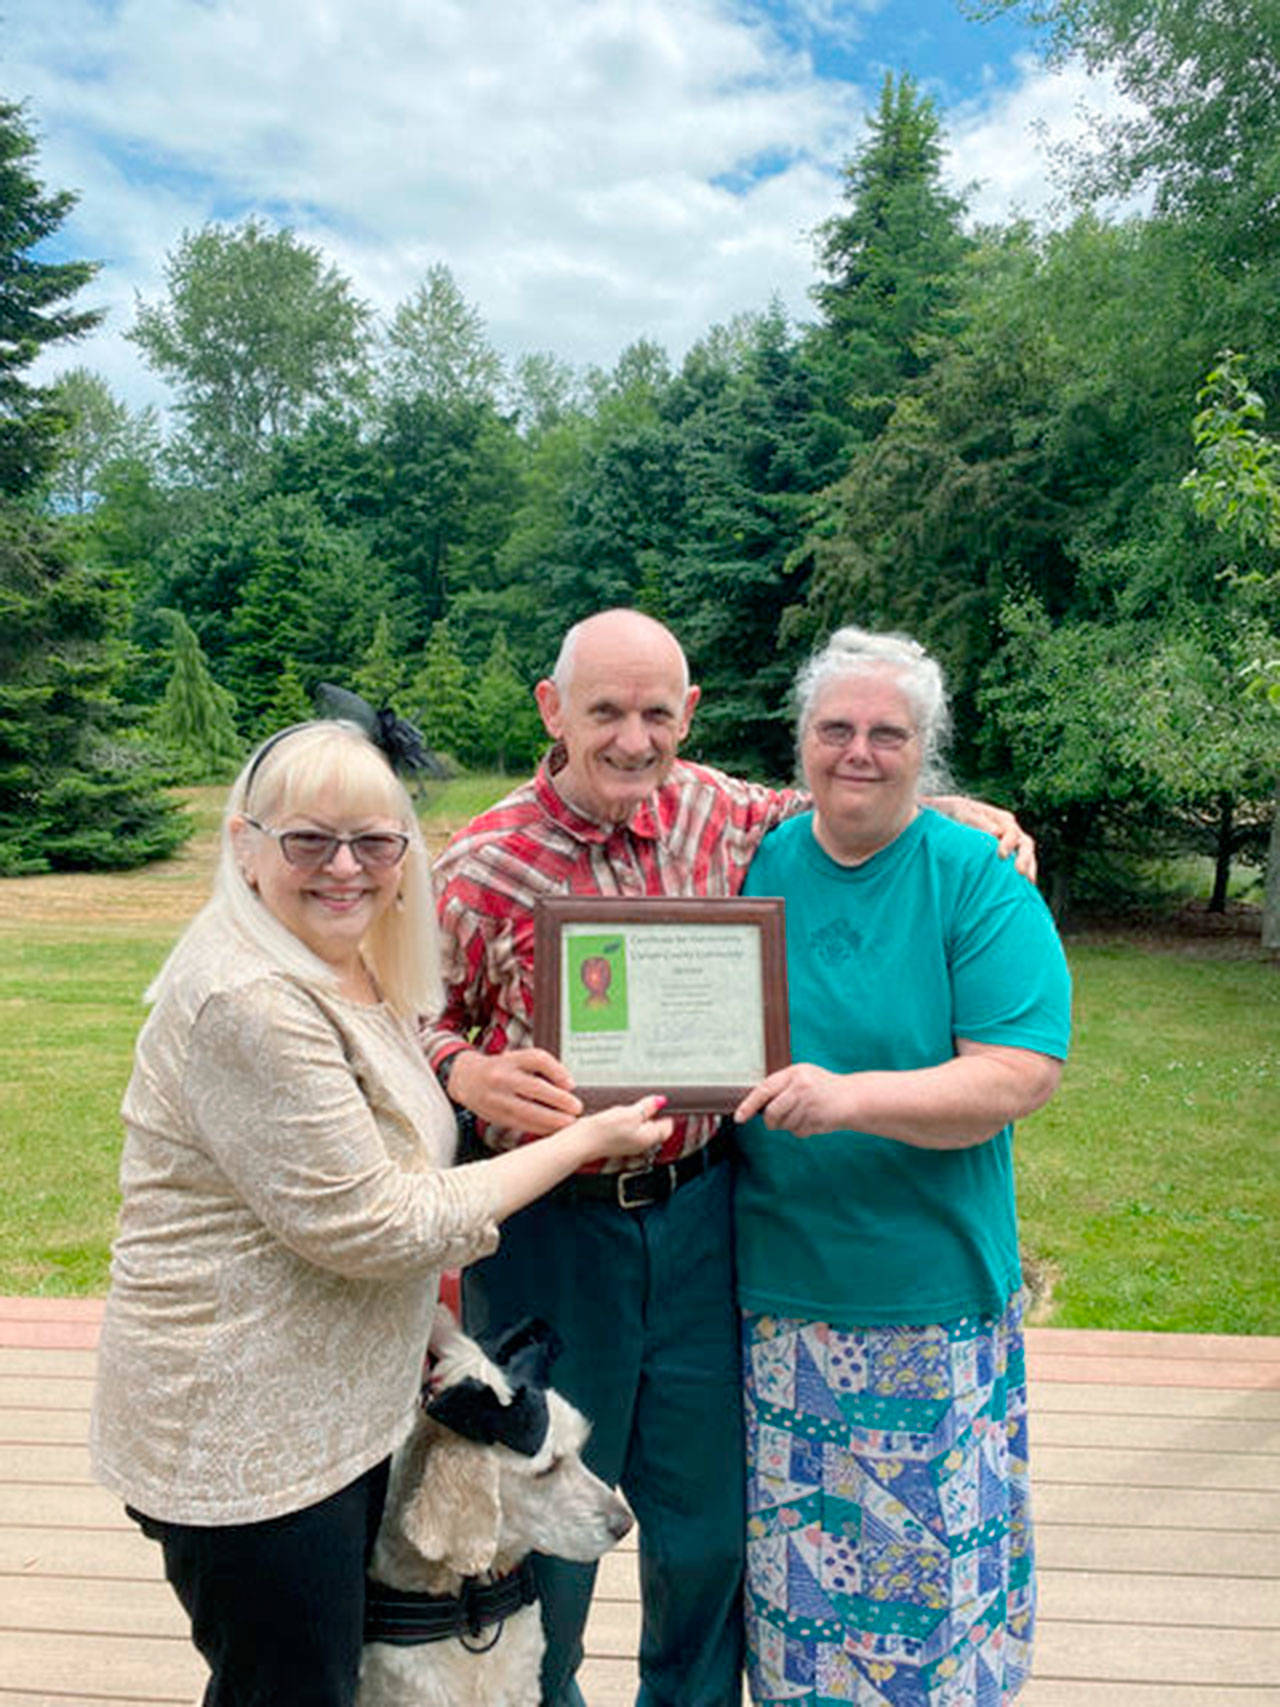 Lora Brabant, left, presents the Clallam County School Retirees Association’s 2021 Community Service Award to Ray and Ginni Weigel, also pictured is Daisy, the service dog. The Weigels were recognized for their support of the community through children’s book drives, cleaning trails, tutoring within the Port Angeles School District and other volunteer services.